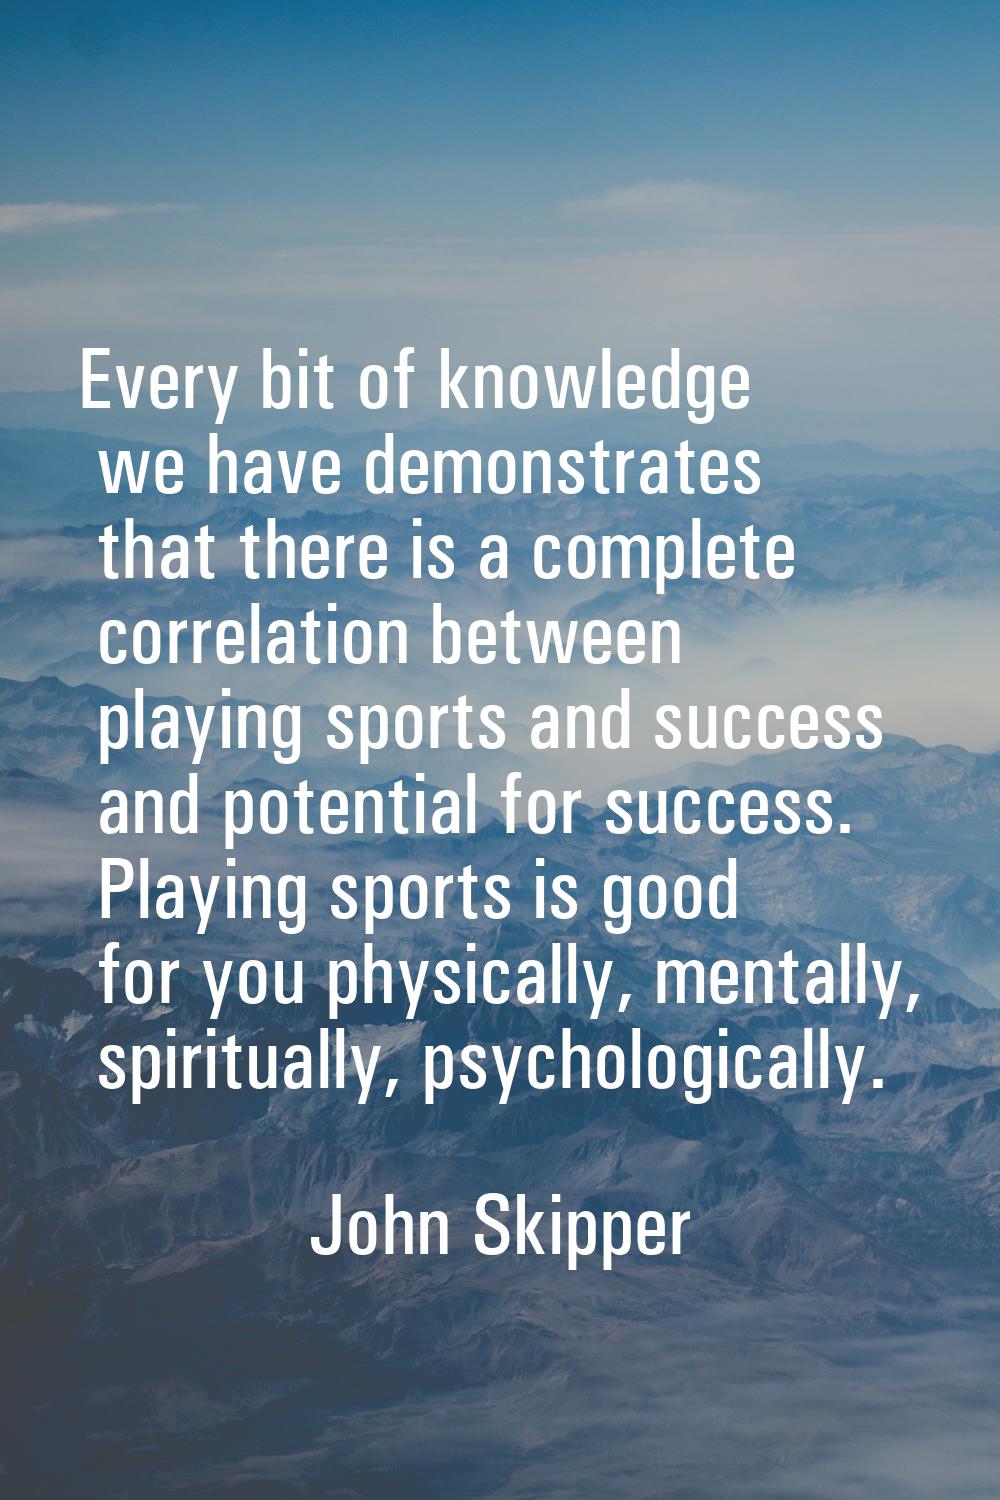 Every bit of knowledge we have demonstrates that there is a complete correlation between playing sp